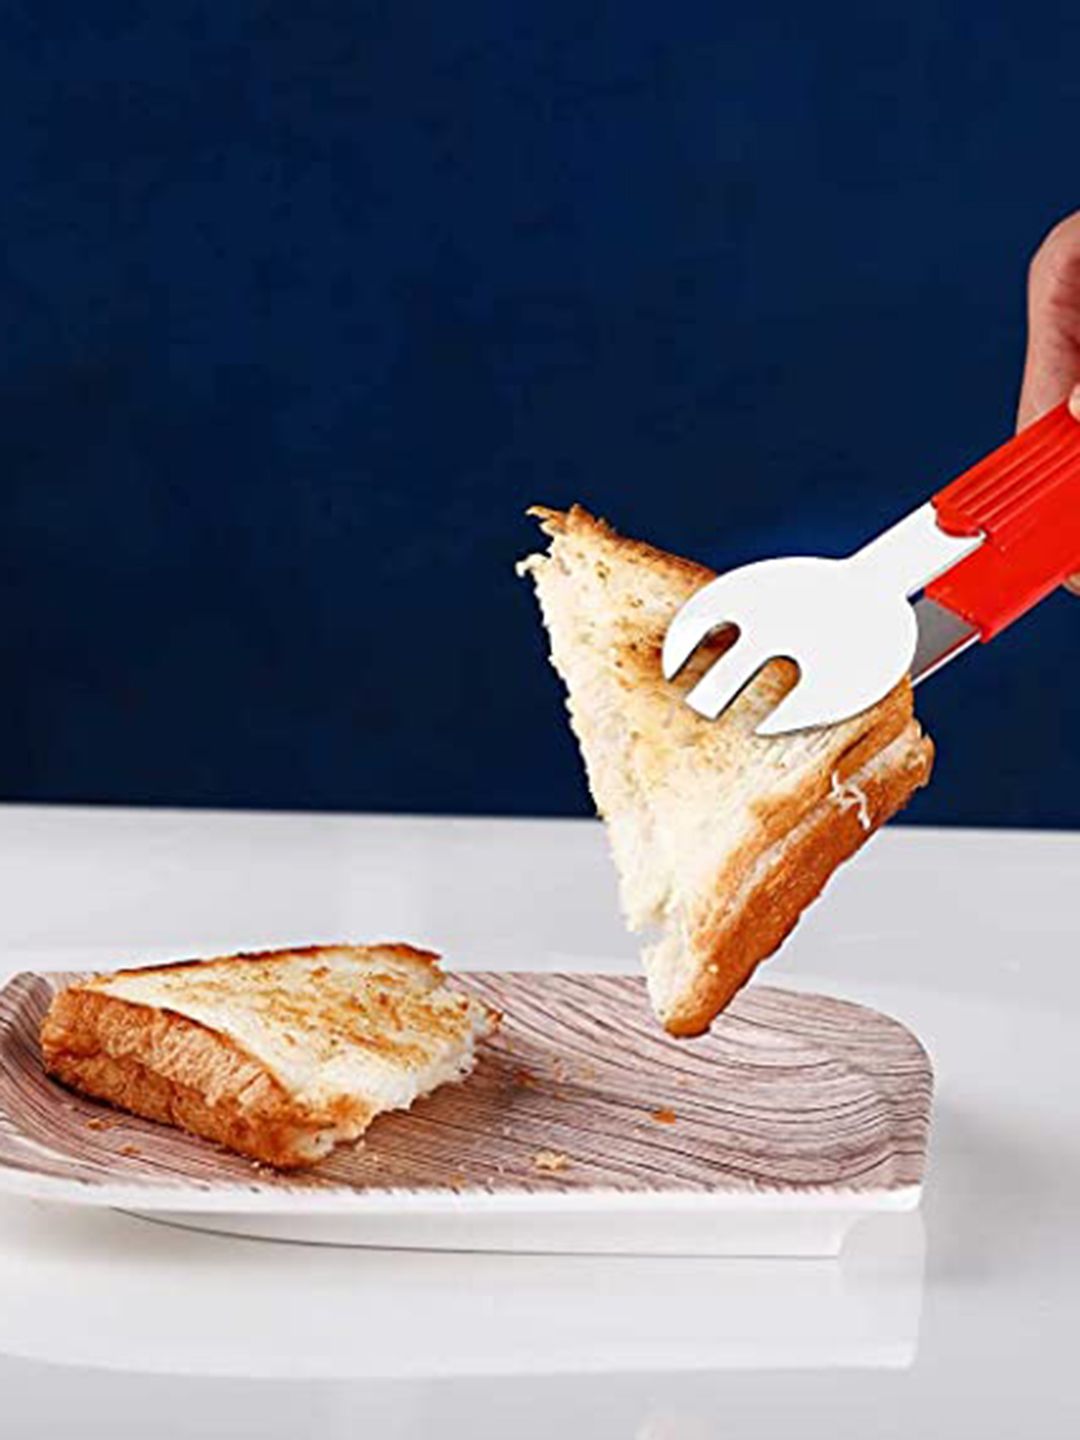 SignoraWare Solid Stainless Steel Pizza Cutter With Bread Tong Price in India